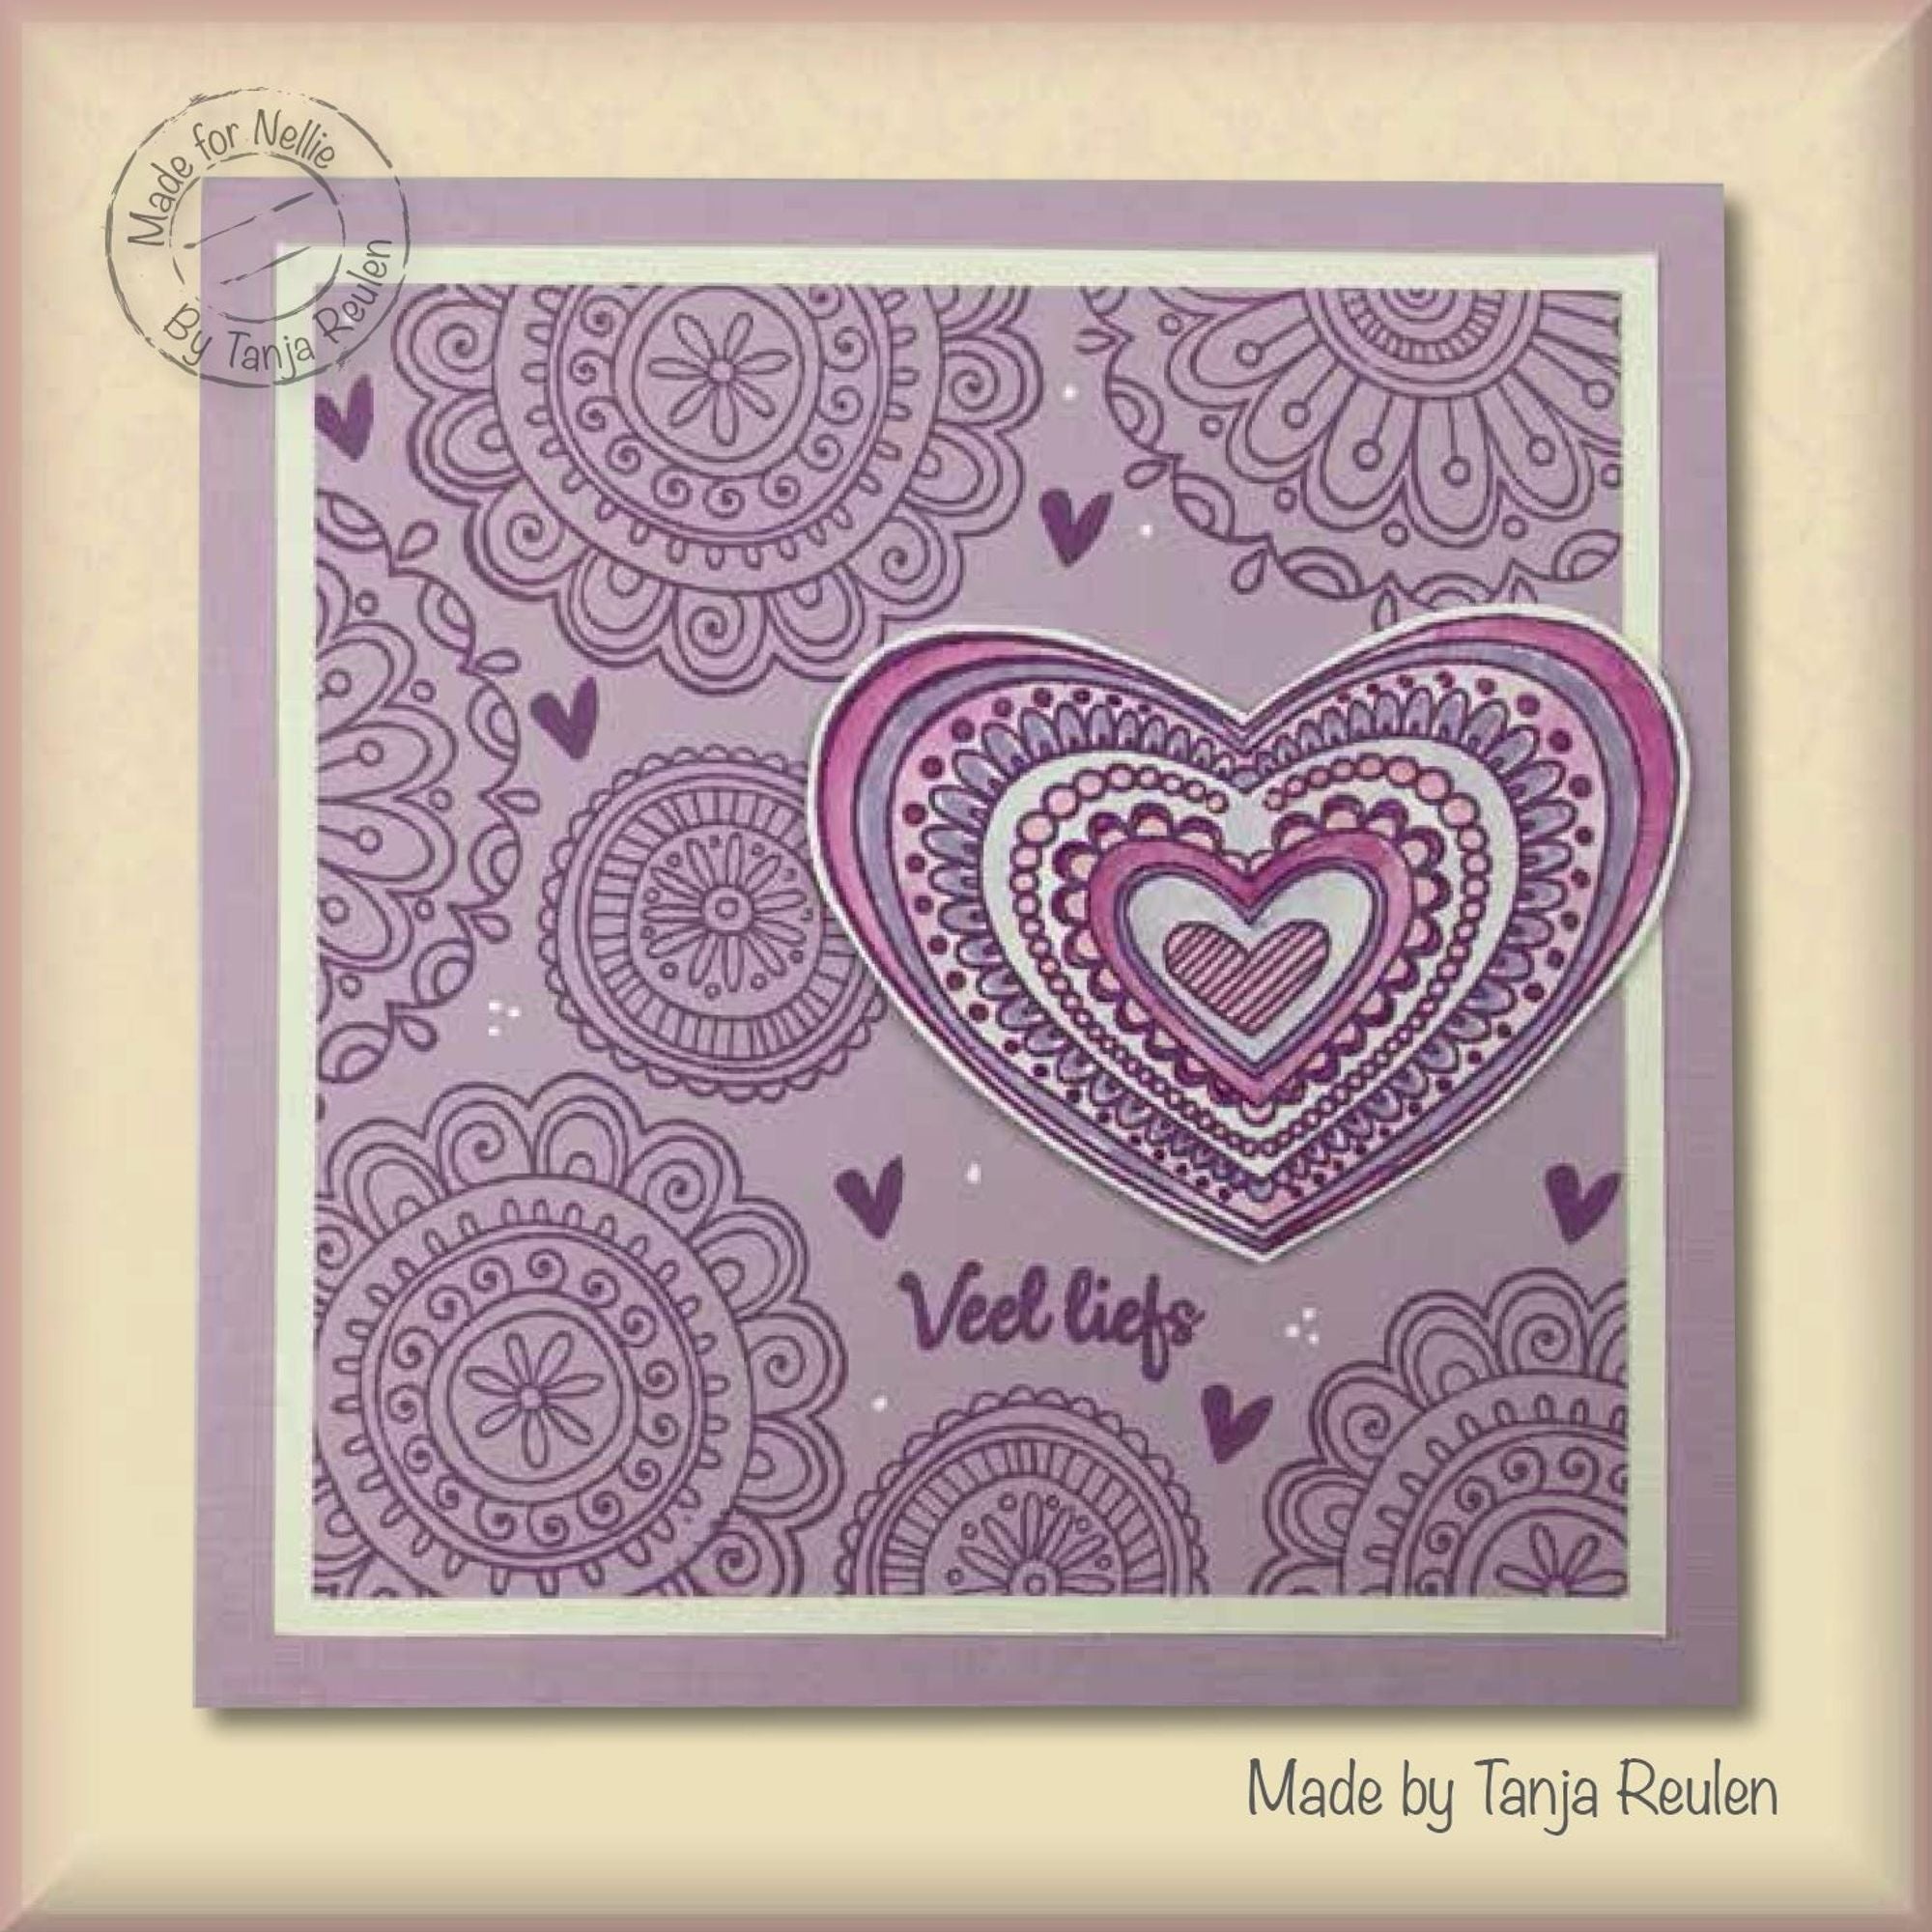 Nellie's Choice Clear Stamp Mandalas Paisley Flower 2